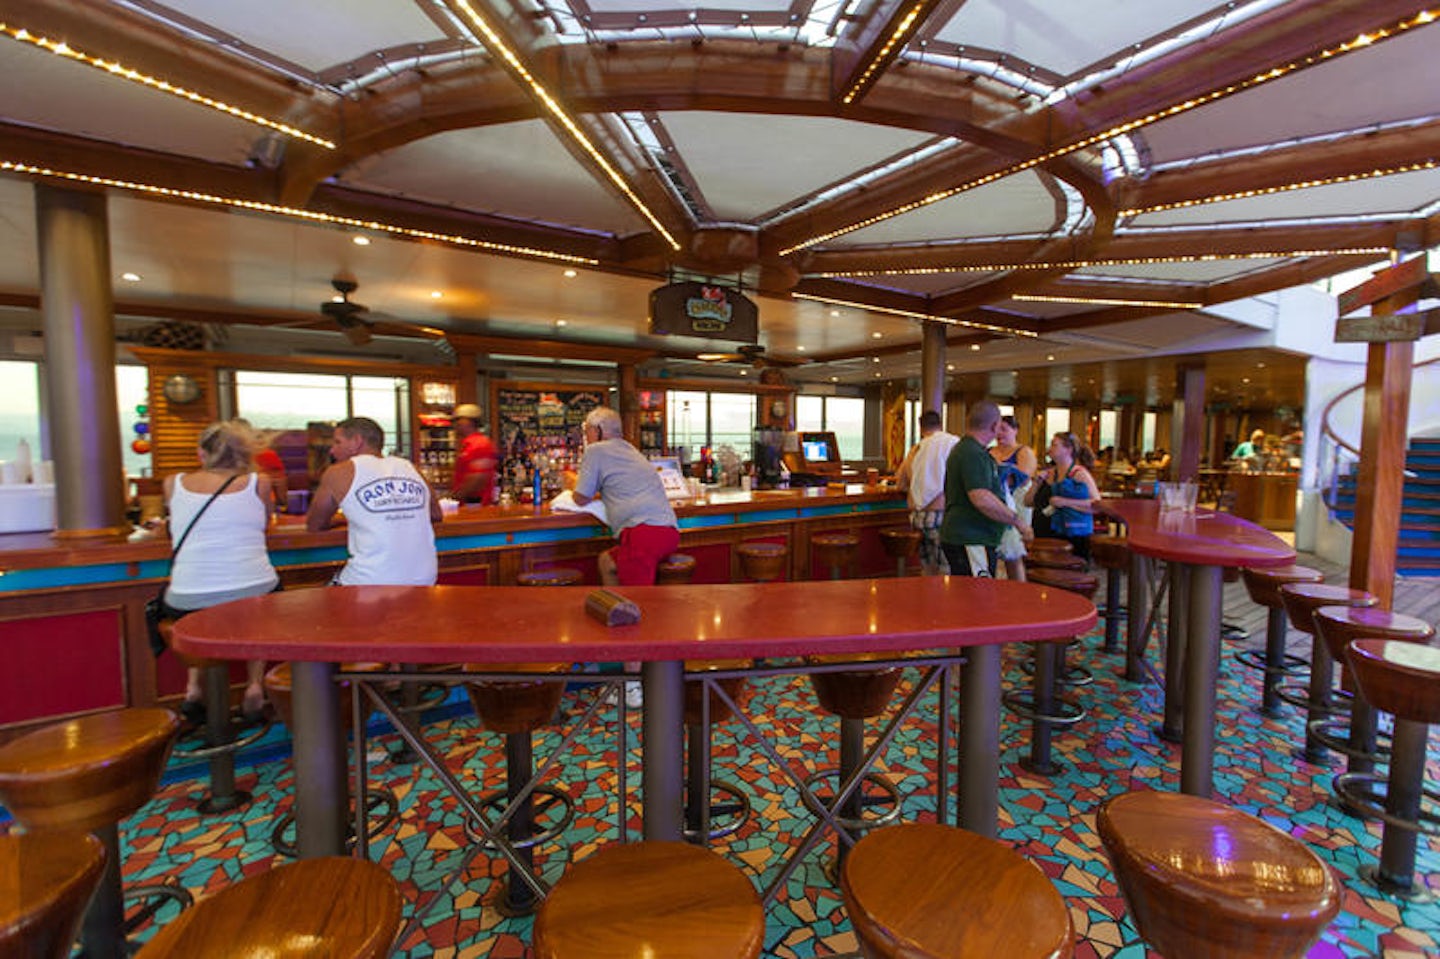 RedFrog Rum Bar on Carnival Conquest